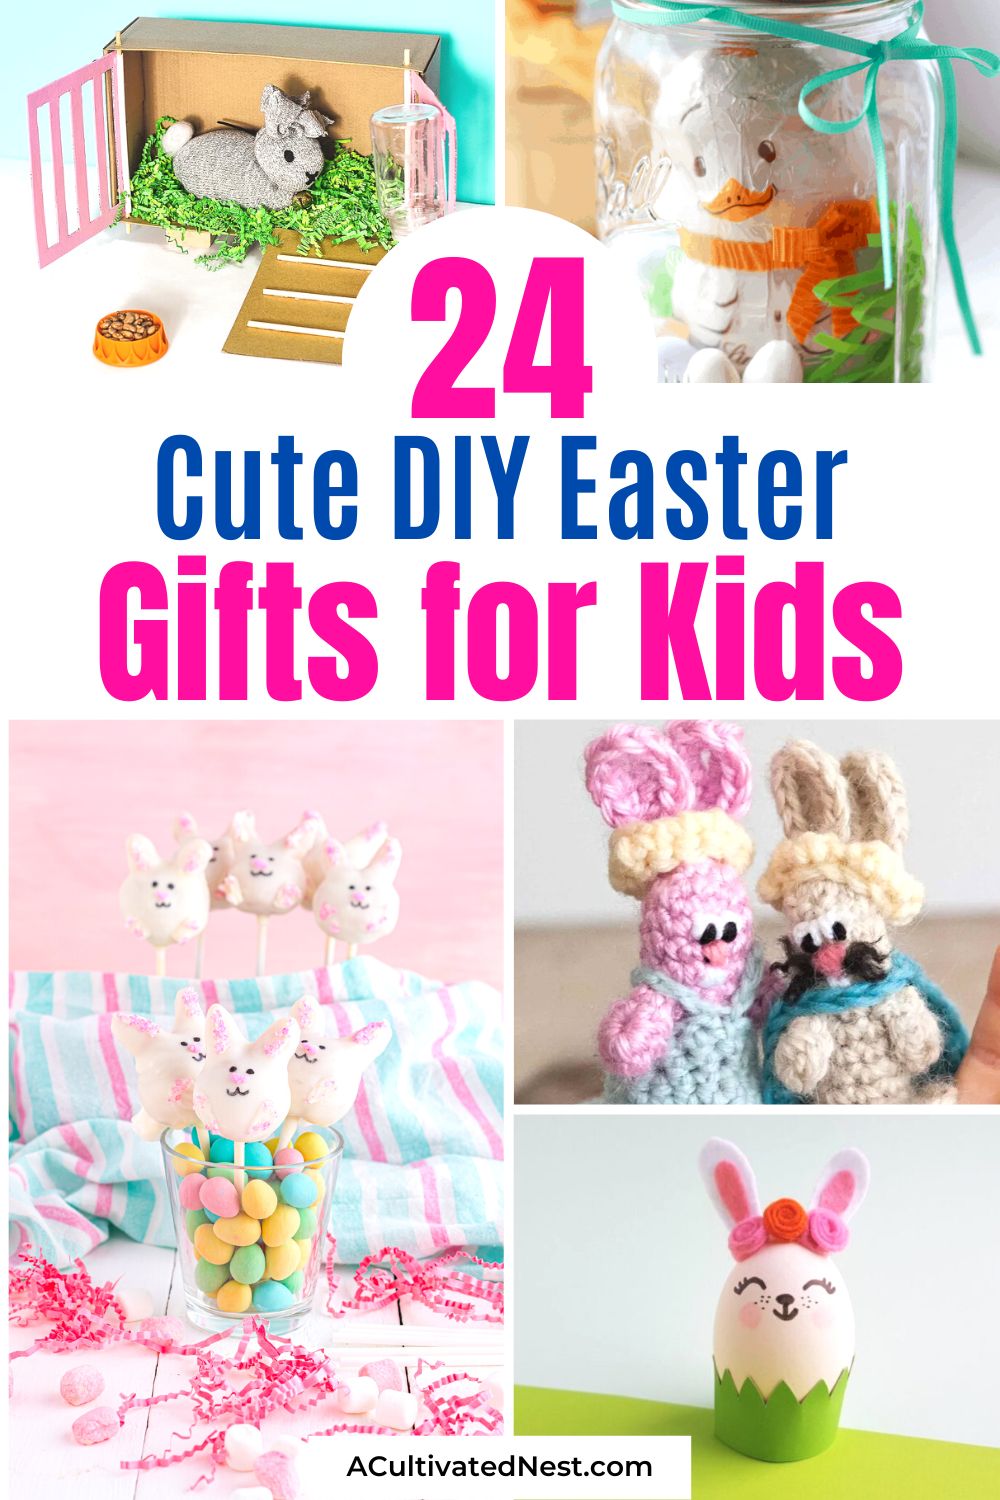 24 Cute DIY Easter Gifts for Kids- Hop into the Easter spirit with these cute DIY Easter gift ideas for kids! From fun and easy crafts to tasty treats, there's something here for every child to enjoy. Get inspired and make this Easter a memorable one with these creative gift ideas! | homemade gifts for Easter, DIY gifts for kids, #Easter #diyGifts #homemadeGifts #EasterDIYs #ACultivatedNest